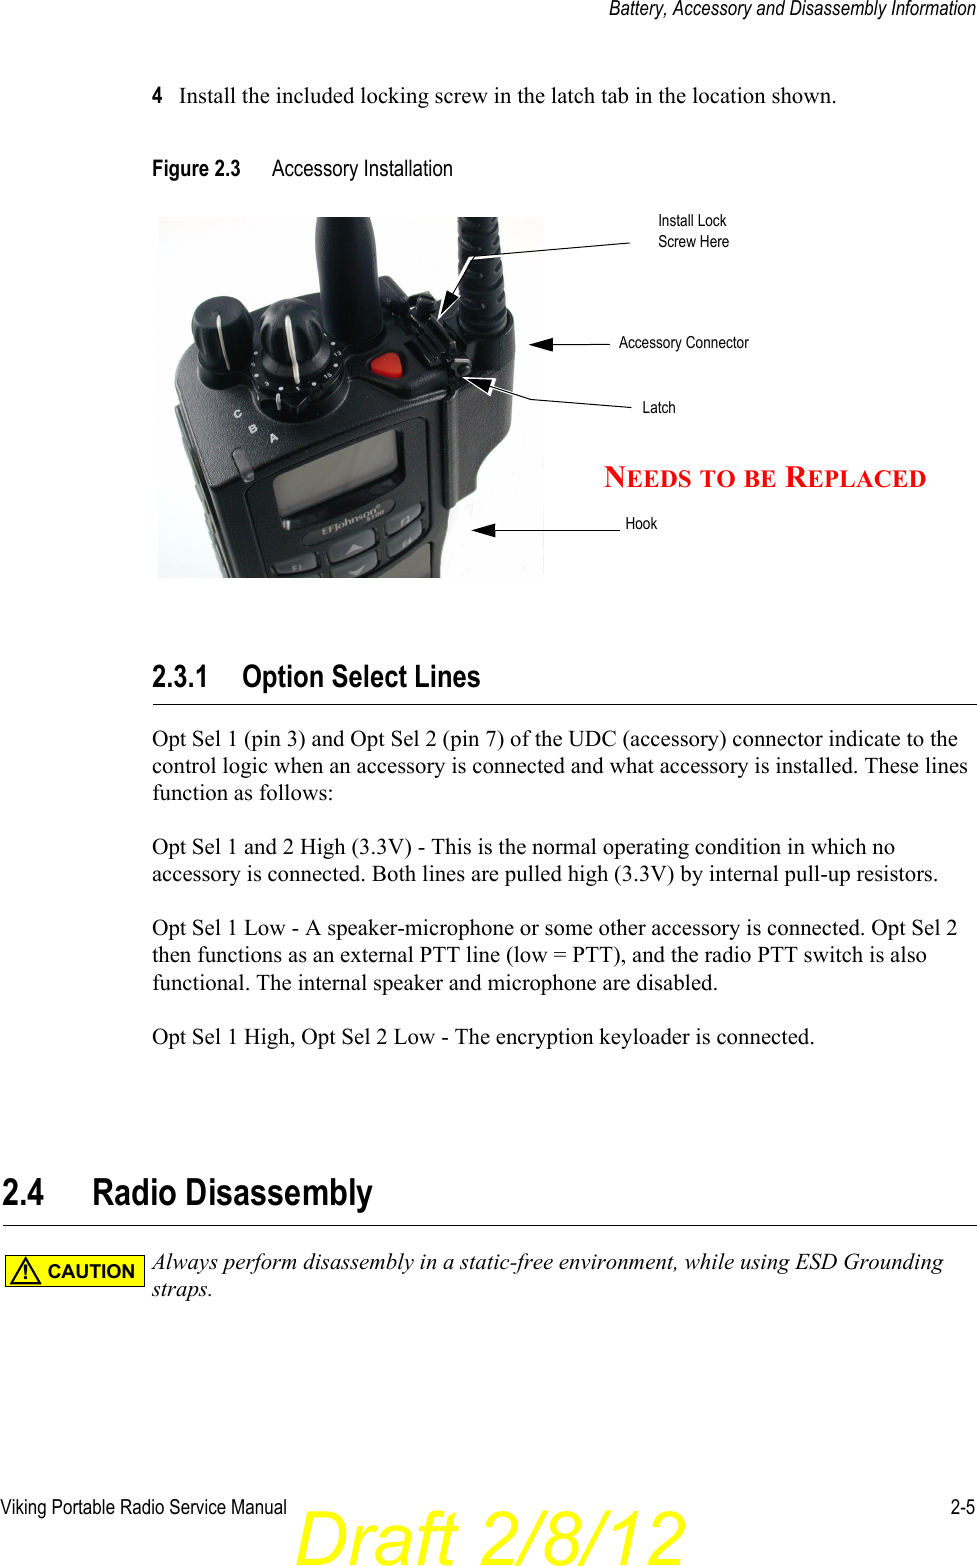 Draft 2/8/12Viking Portable Radio Service Manual 2-5Battery, Accessory and Disassembly Information4Install the included locking screw in the latch tab in the location shown.Figure 2.3 Accessory Installation2.3.1 Option Select LinesOpt Sel 1 (pin 3) and Opt Sel 2 (pin 7) of the UDC (accessory) connector indicate to the control logic when an accessory is connected and what accessory is installed. These lines function as follows:Opt Sel 1 and 2 High (3.3V) - This is the normal operating condition in which no accessory is connected. Both lines are pulled high (3.3V) by internal pull-up resistors.Opt Sel 1 Low - A speaker-microphone or some other accessory is connected. Opt Sel 2 then functions as an external PTT line (low = PTT), and the radio PTT switch is also functional. The internal speaker and microphone are disabled.Opt Sel 1 High, Opt Sel 2 Low - The encryption keyloader is connected.2.4 Radio DisassemblyAlways perform disassembly in a static-free environment, while using ESD Grounding straps.HookLatchAccessory ConnectorInstall LockScrew HereNEEDS TO BE REPLACEDCAUTION!